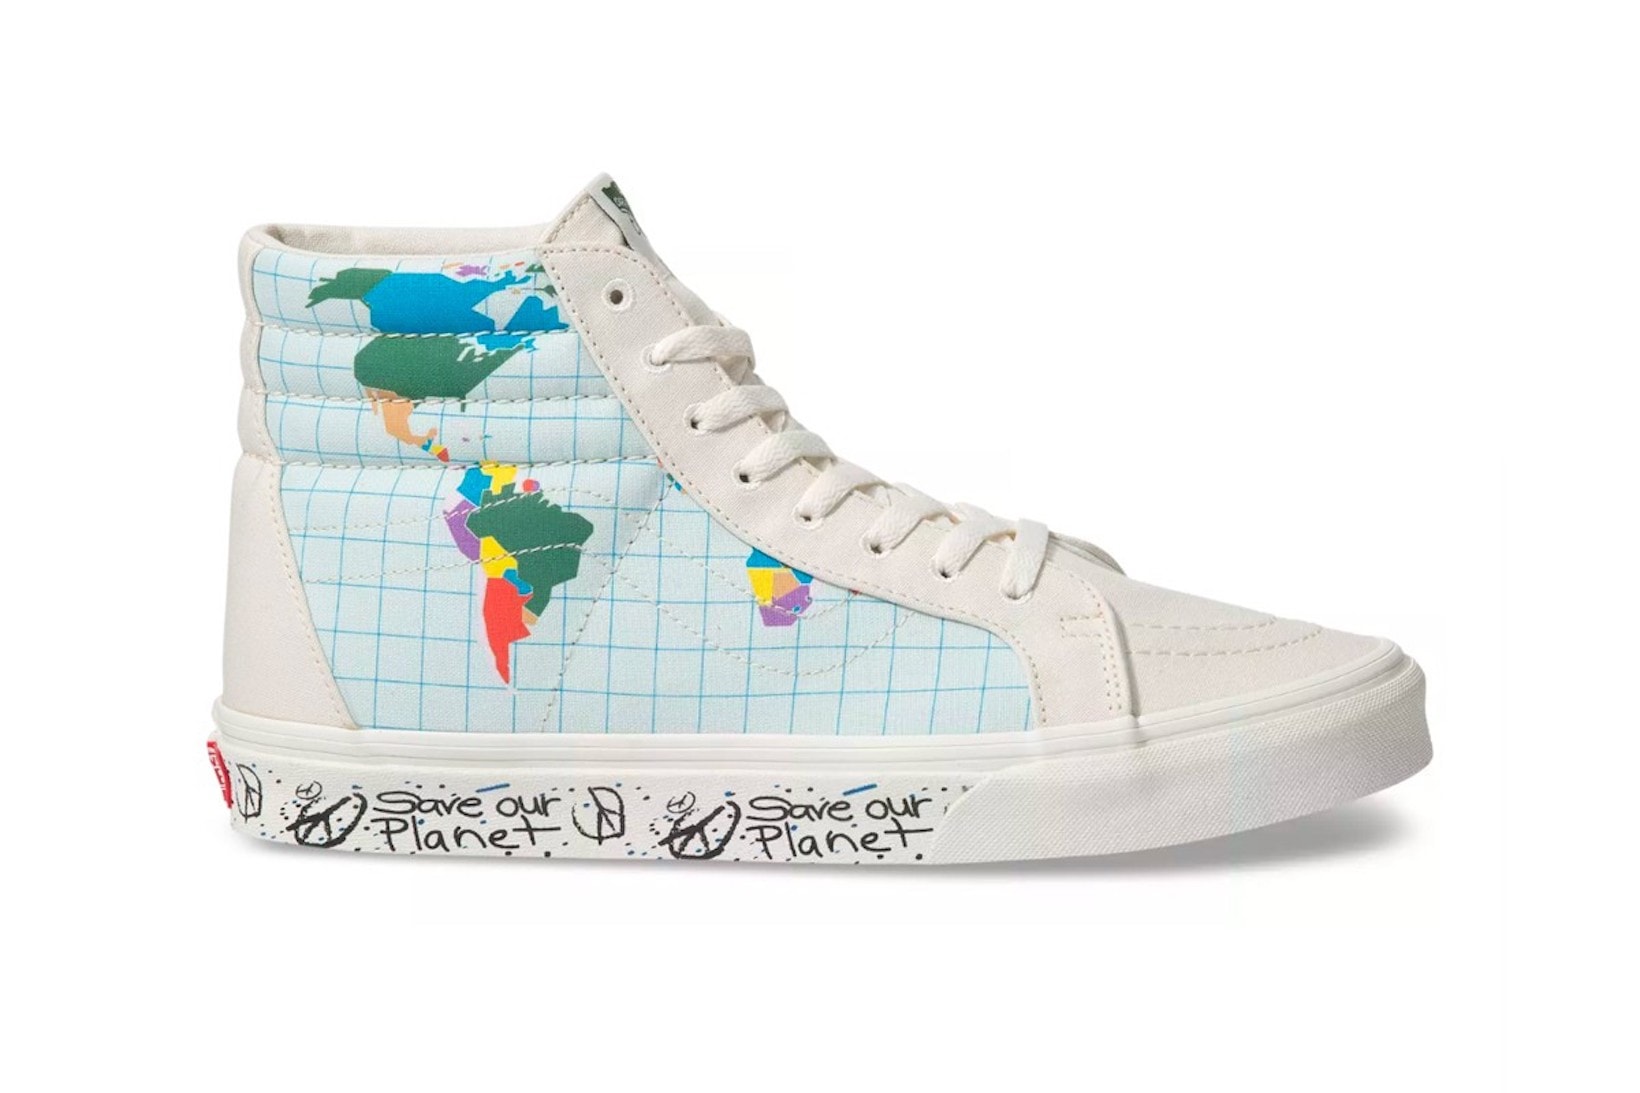 vans save our planet collection sk8 hi reissue sneakers sustainability shoes footwear white